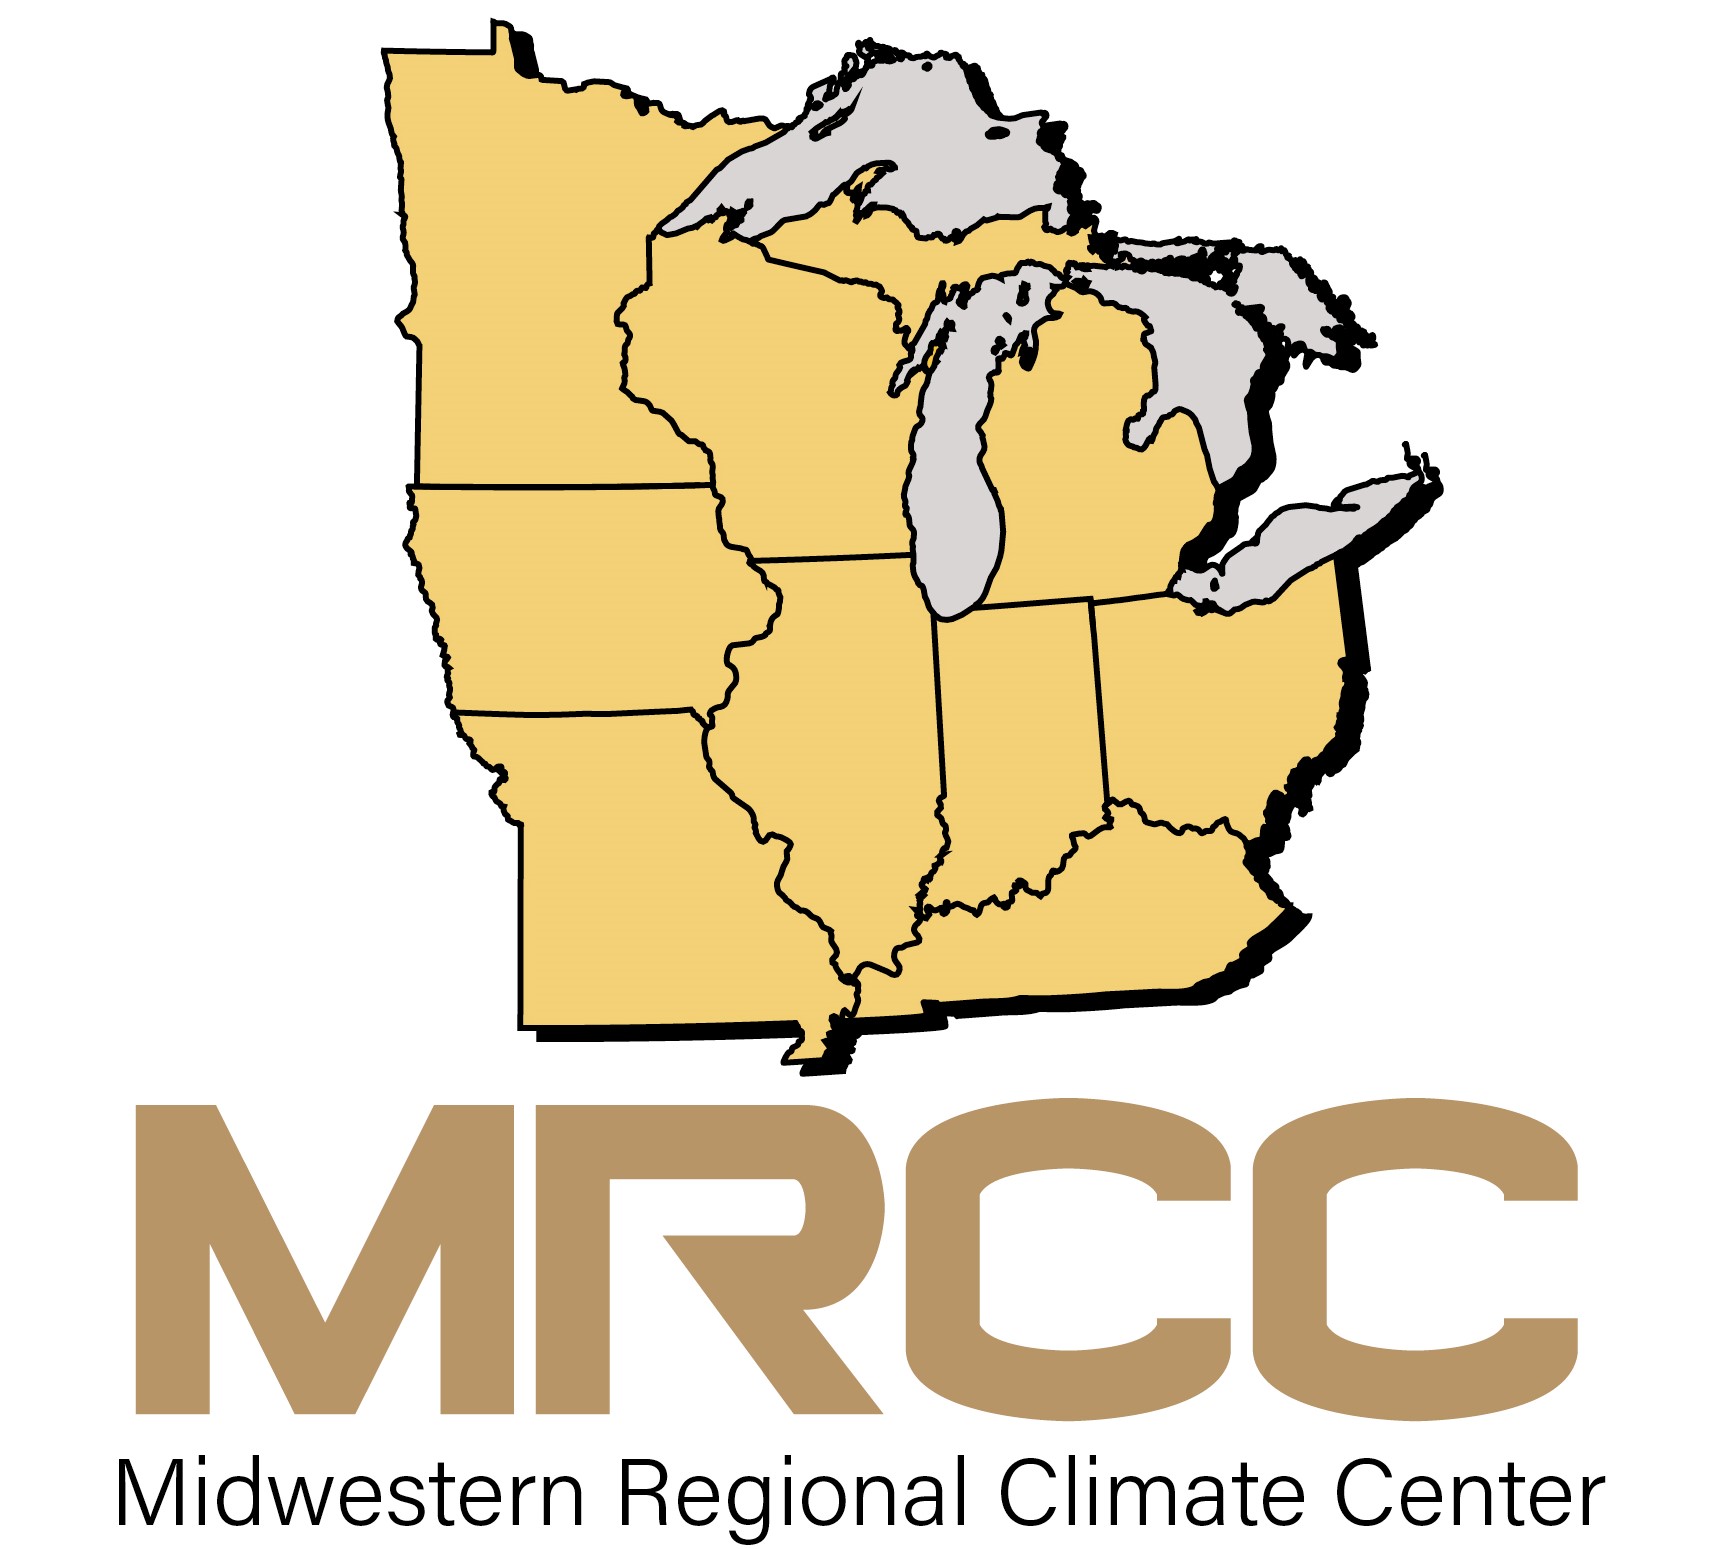 Midwestern Regional Climate Center